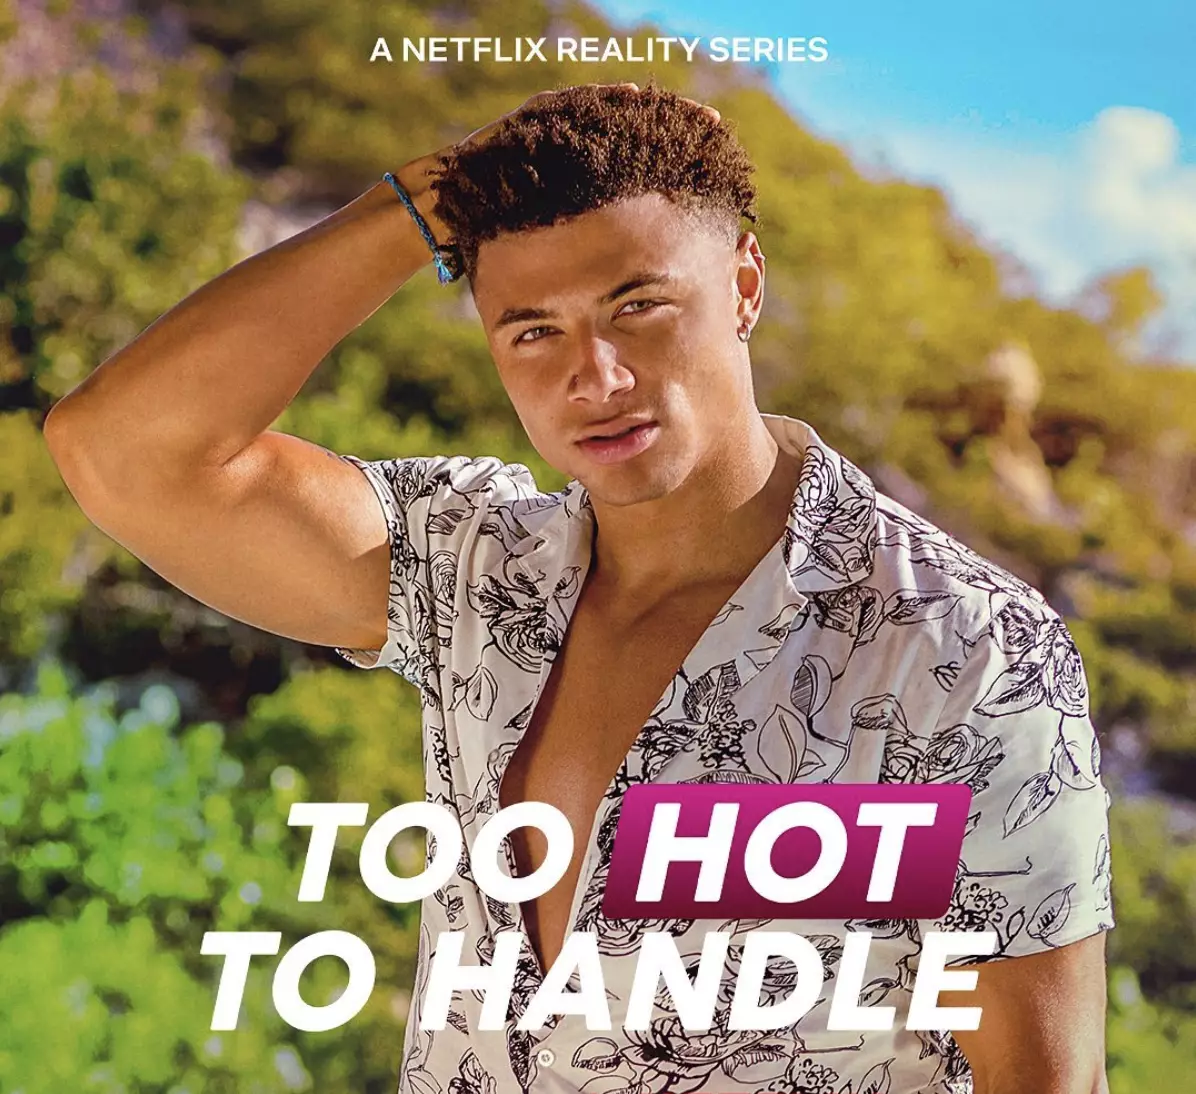 Chase in 'Too Hot To Handle' (